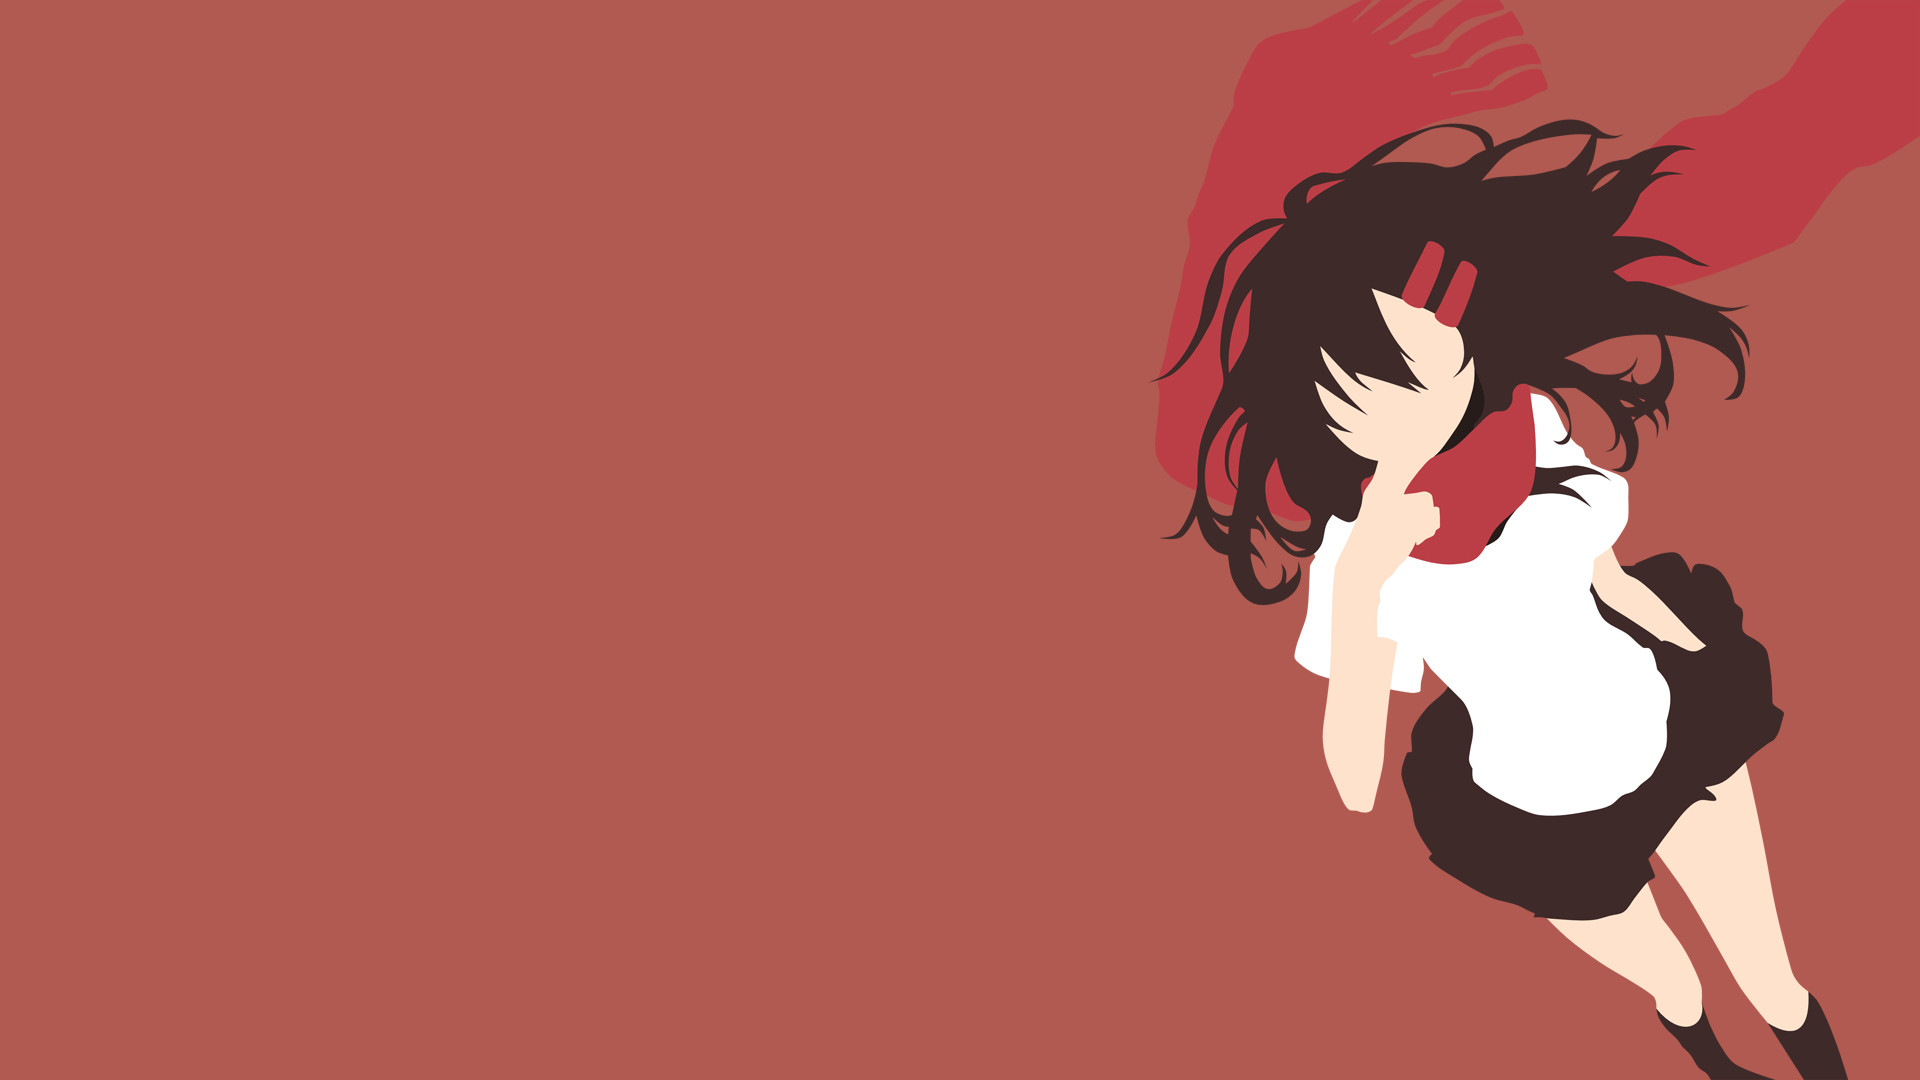 The Strength Minimalist by Rendracula on DeviantArt Minimalist Pinterest Minimalist, Kagerou project and deviantART